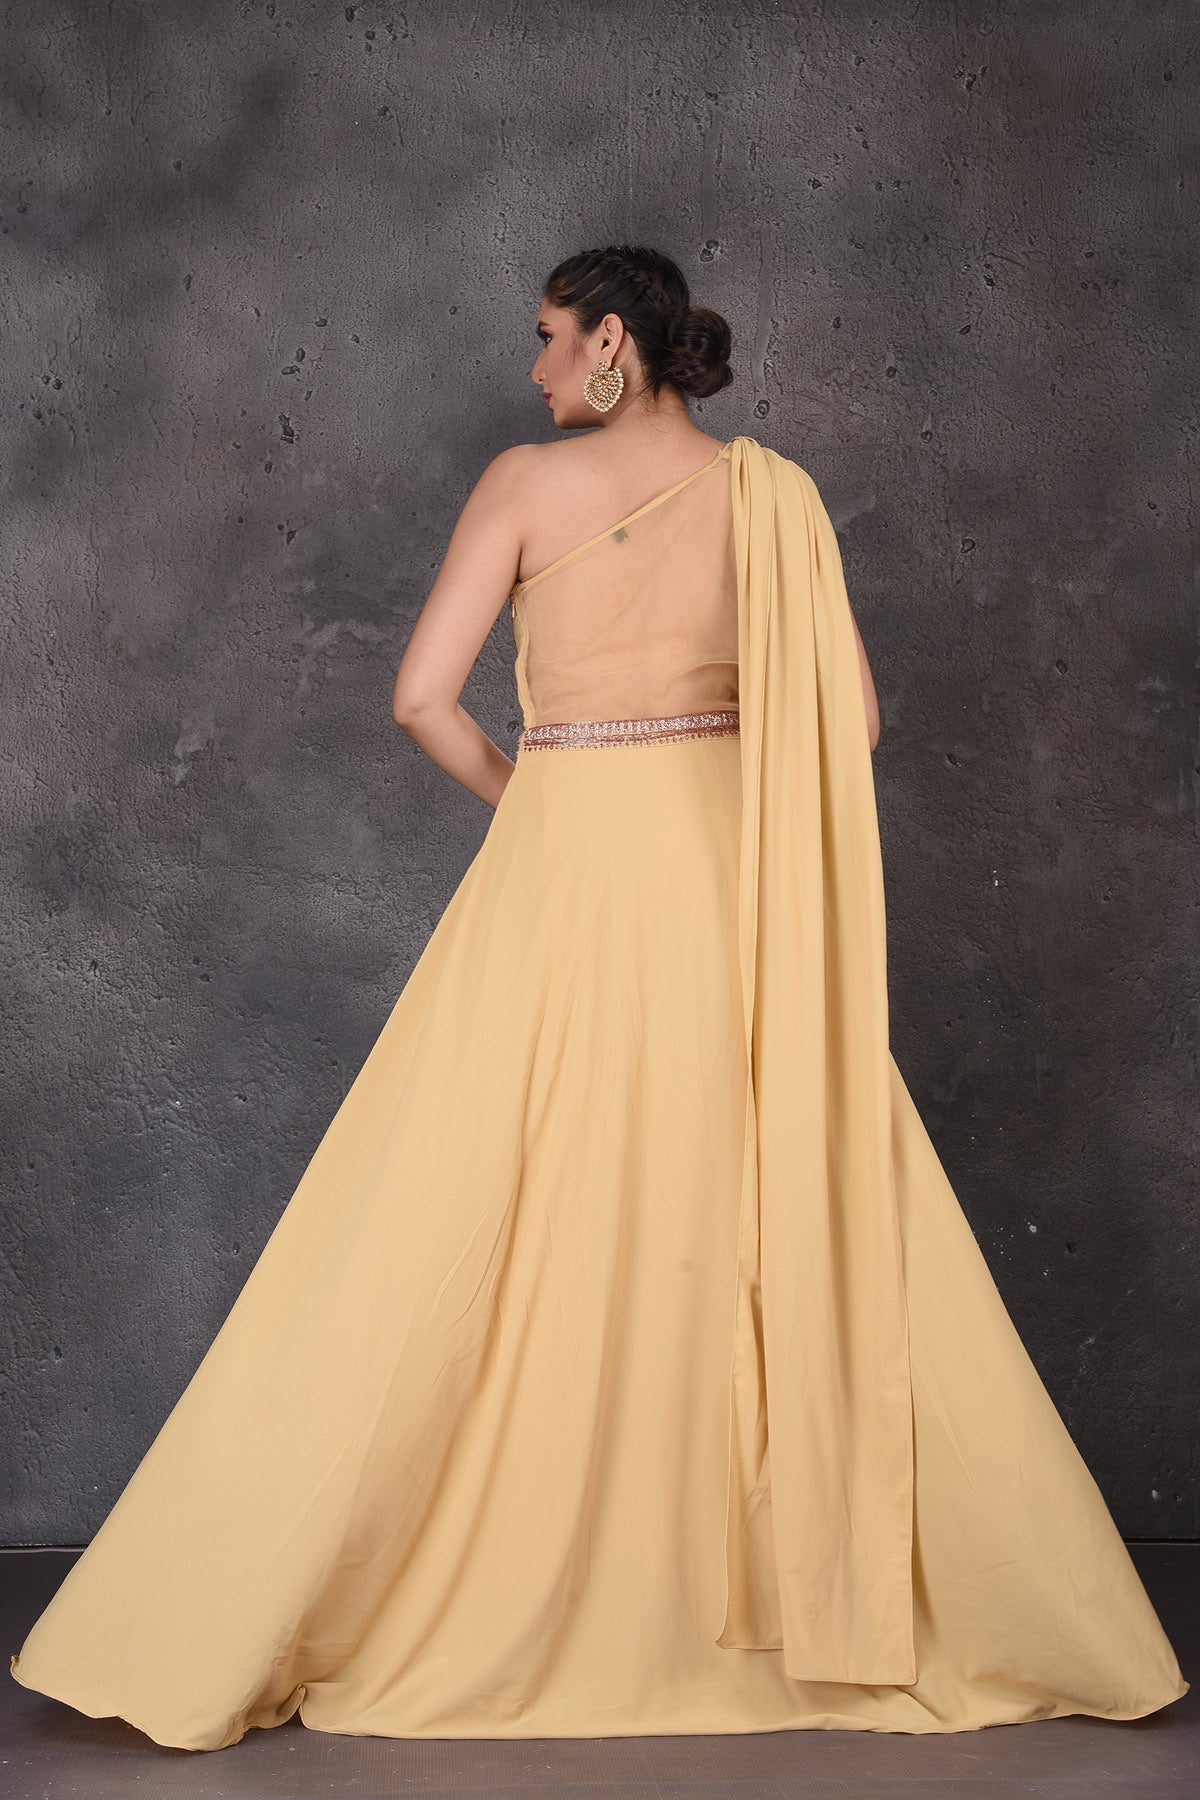 Peachmode - Buy latest designer gowns online from... | Facebook